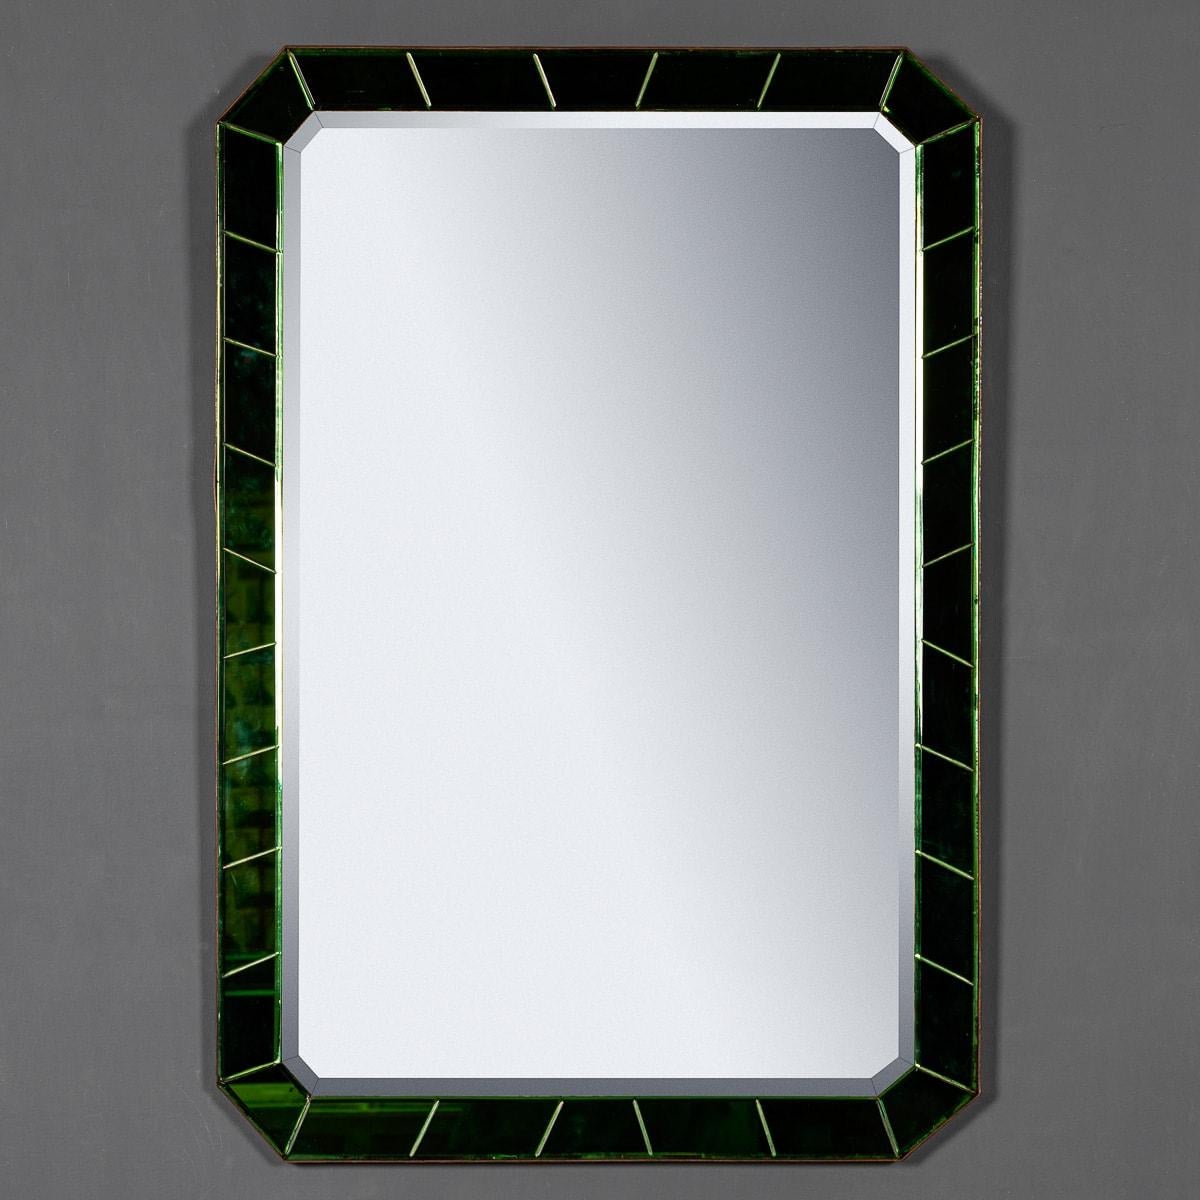 Antique early 20th Century Art Deco style mirror with a segmented green glass & brass bevelled surround. A beautiful piece of period furniture, a very practical and a truly wonderful conversation piece capable of transporting the imagination to a